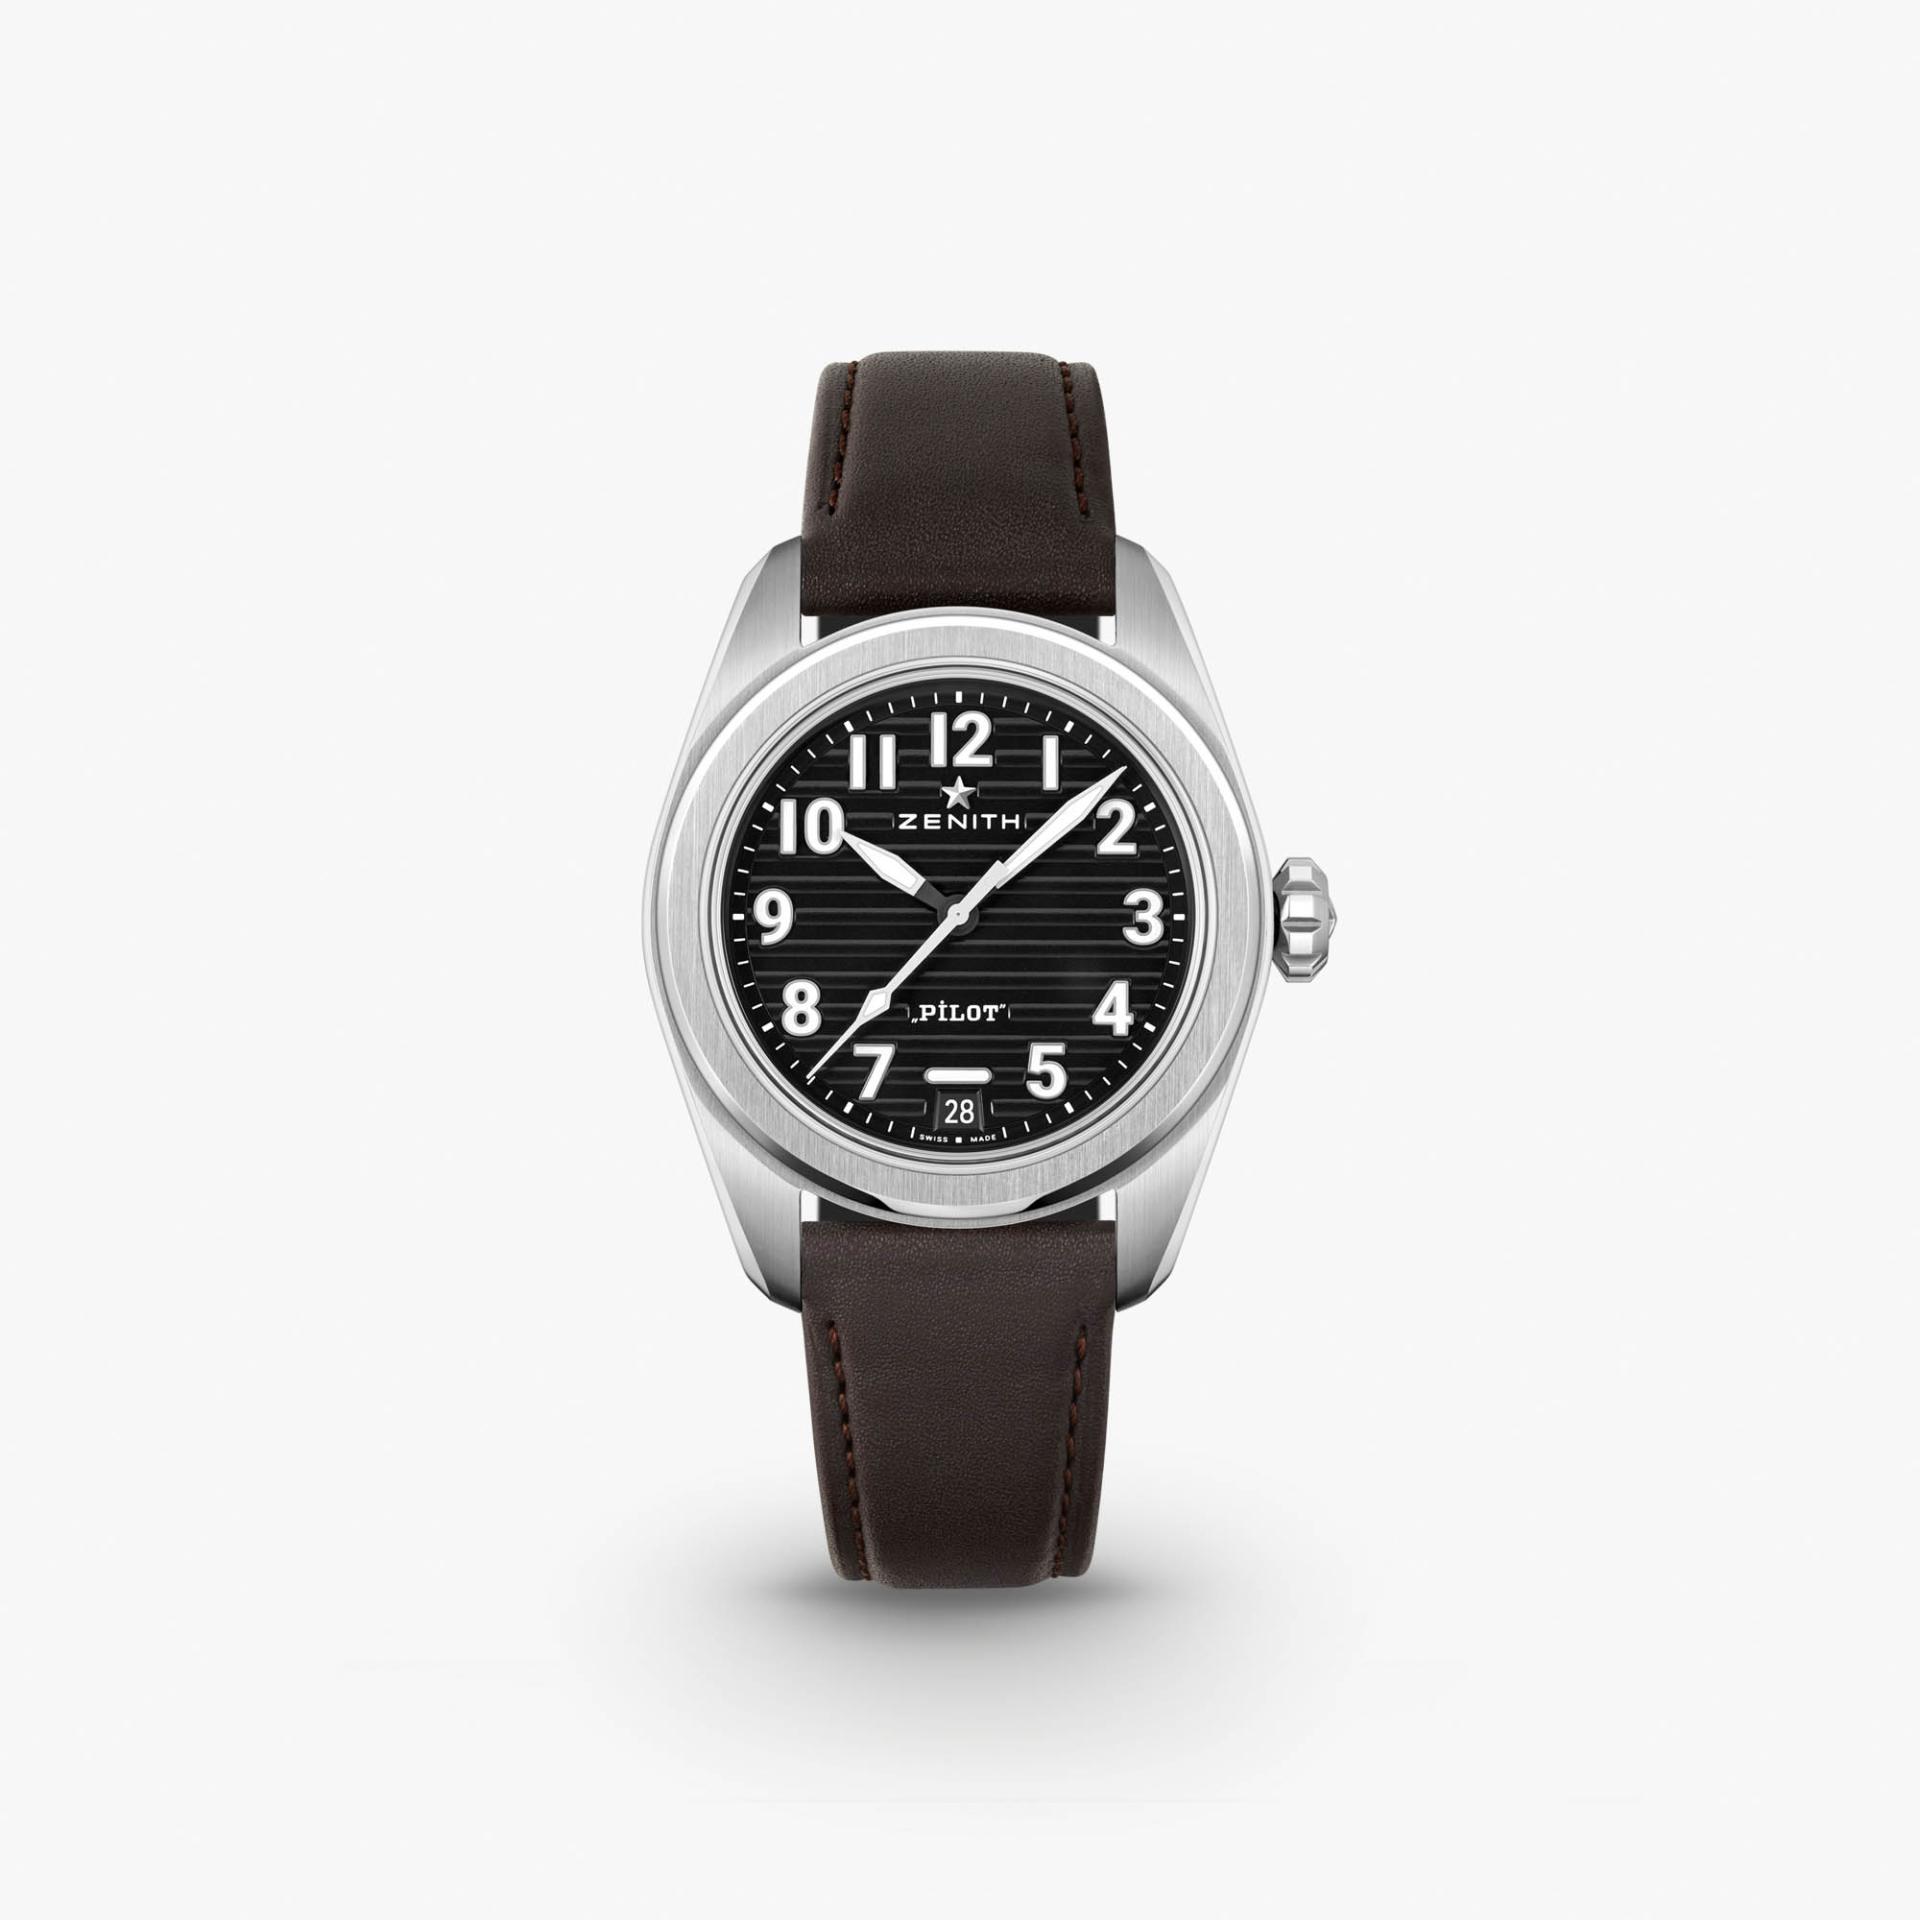 Pilot Automatic made by Zenith